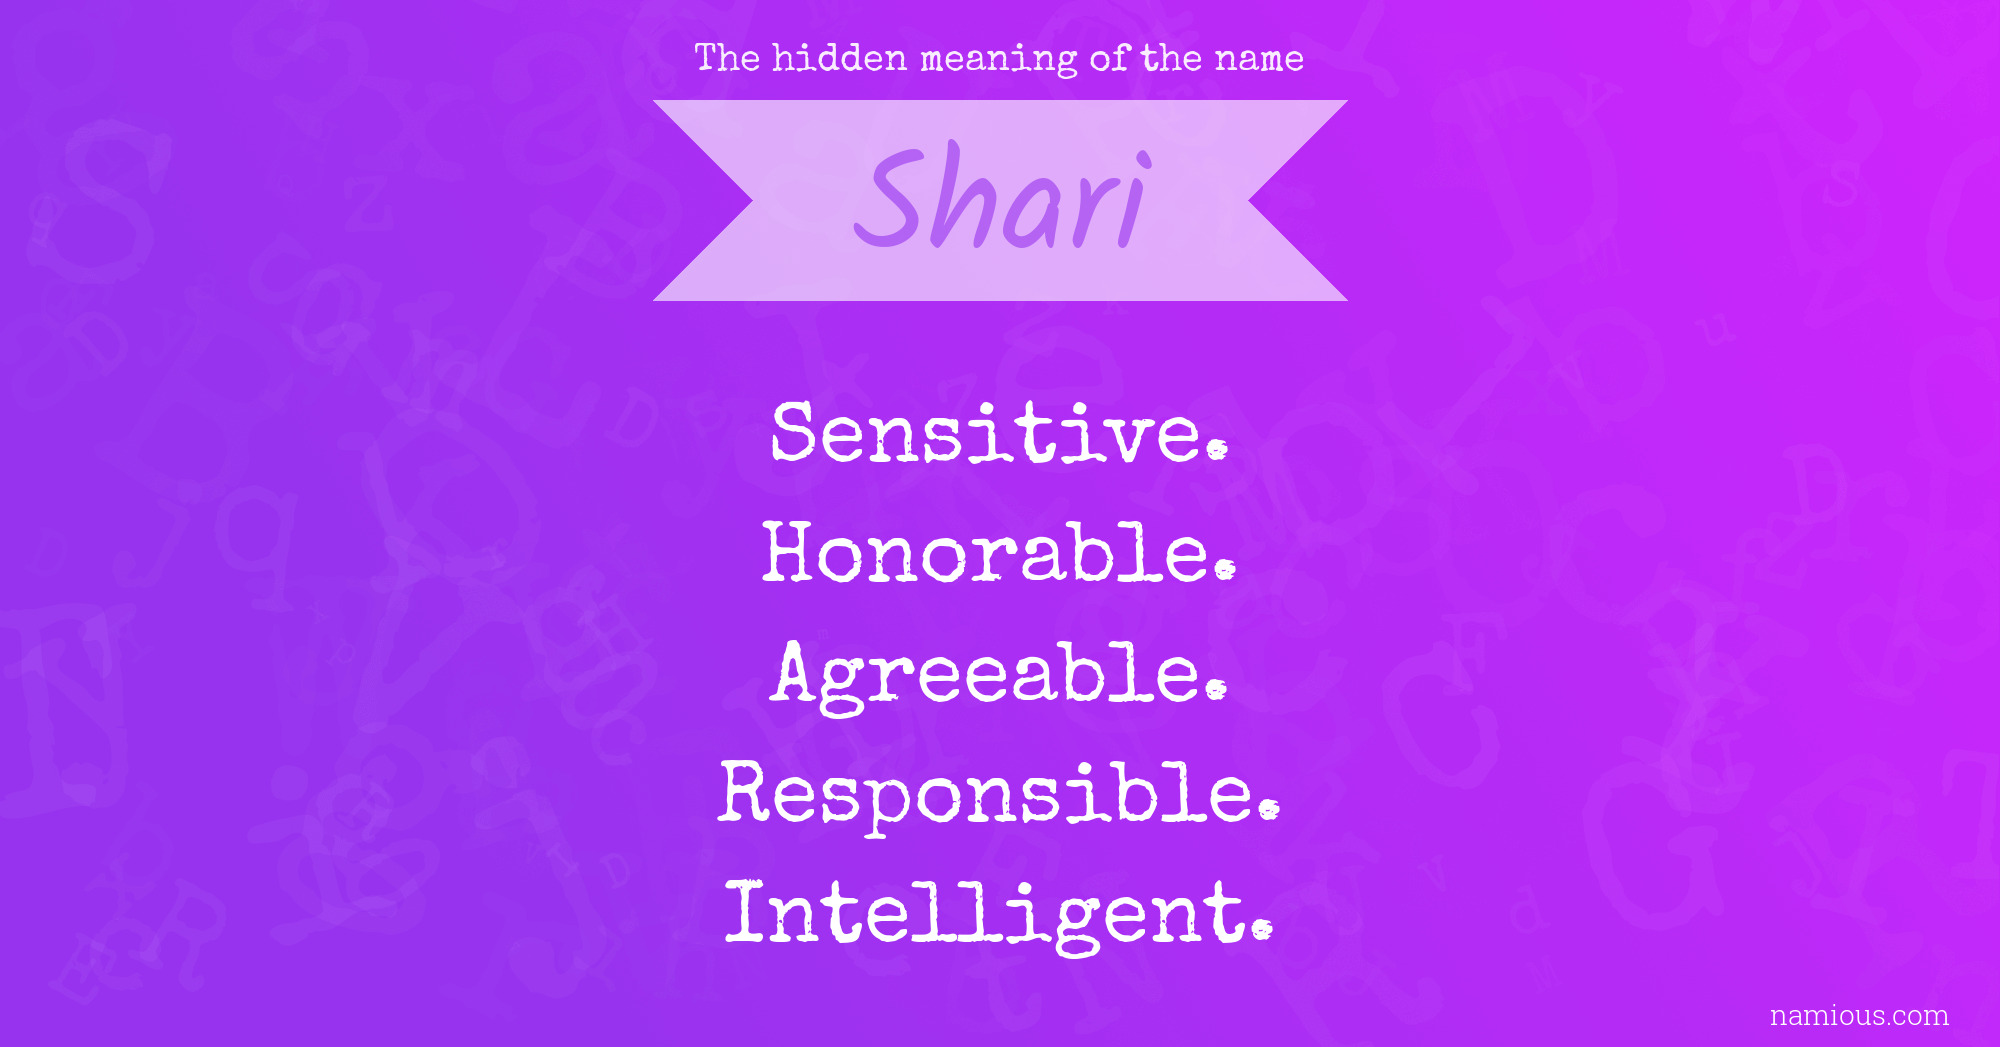 The hidden meaning of the name Shari